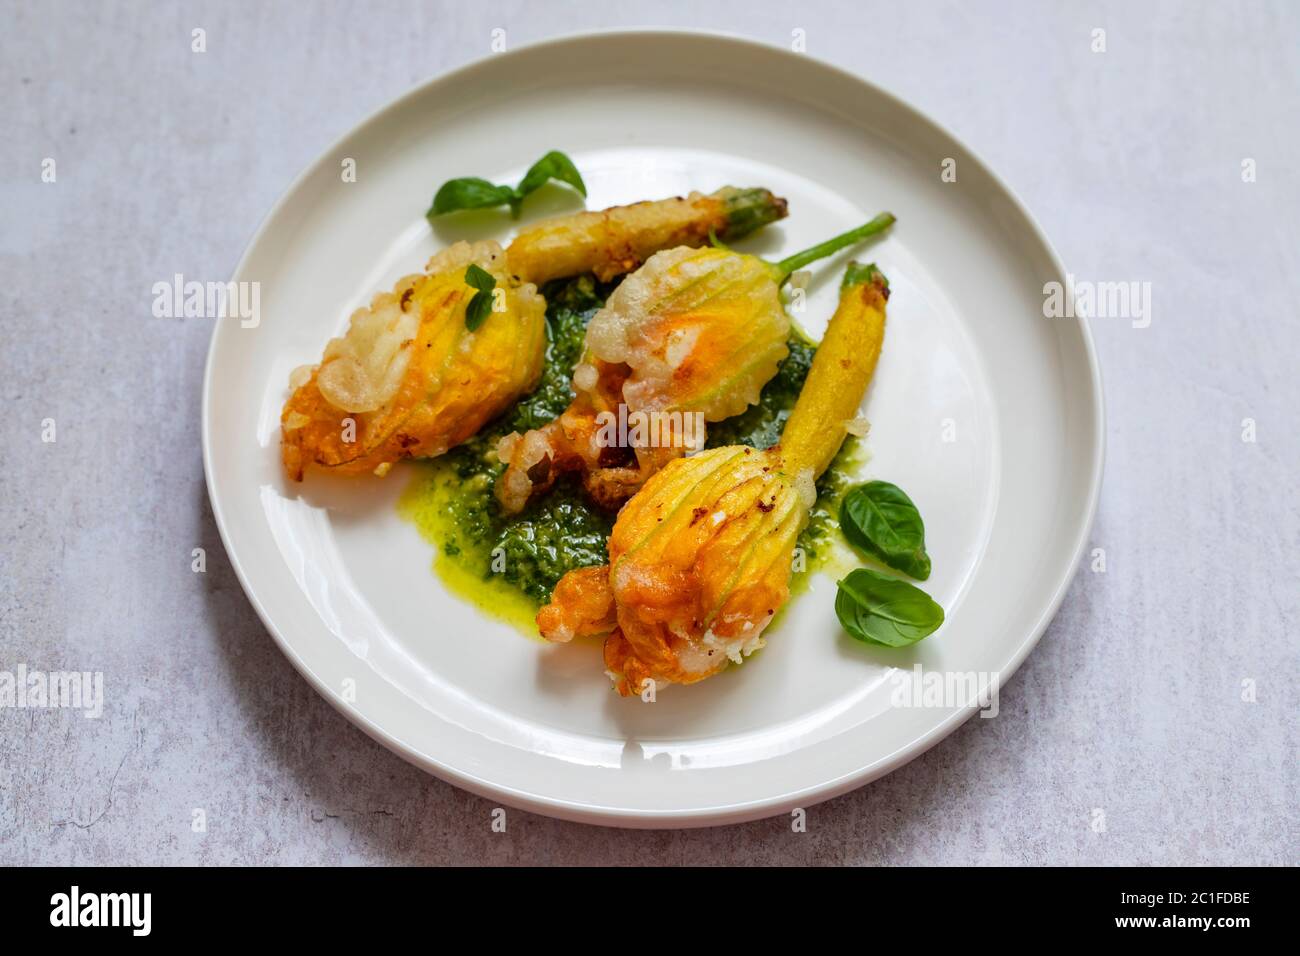 Fried courgette flowers stuffed with ricotta cheese in light tempura batter  Stock Photo - Alamy